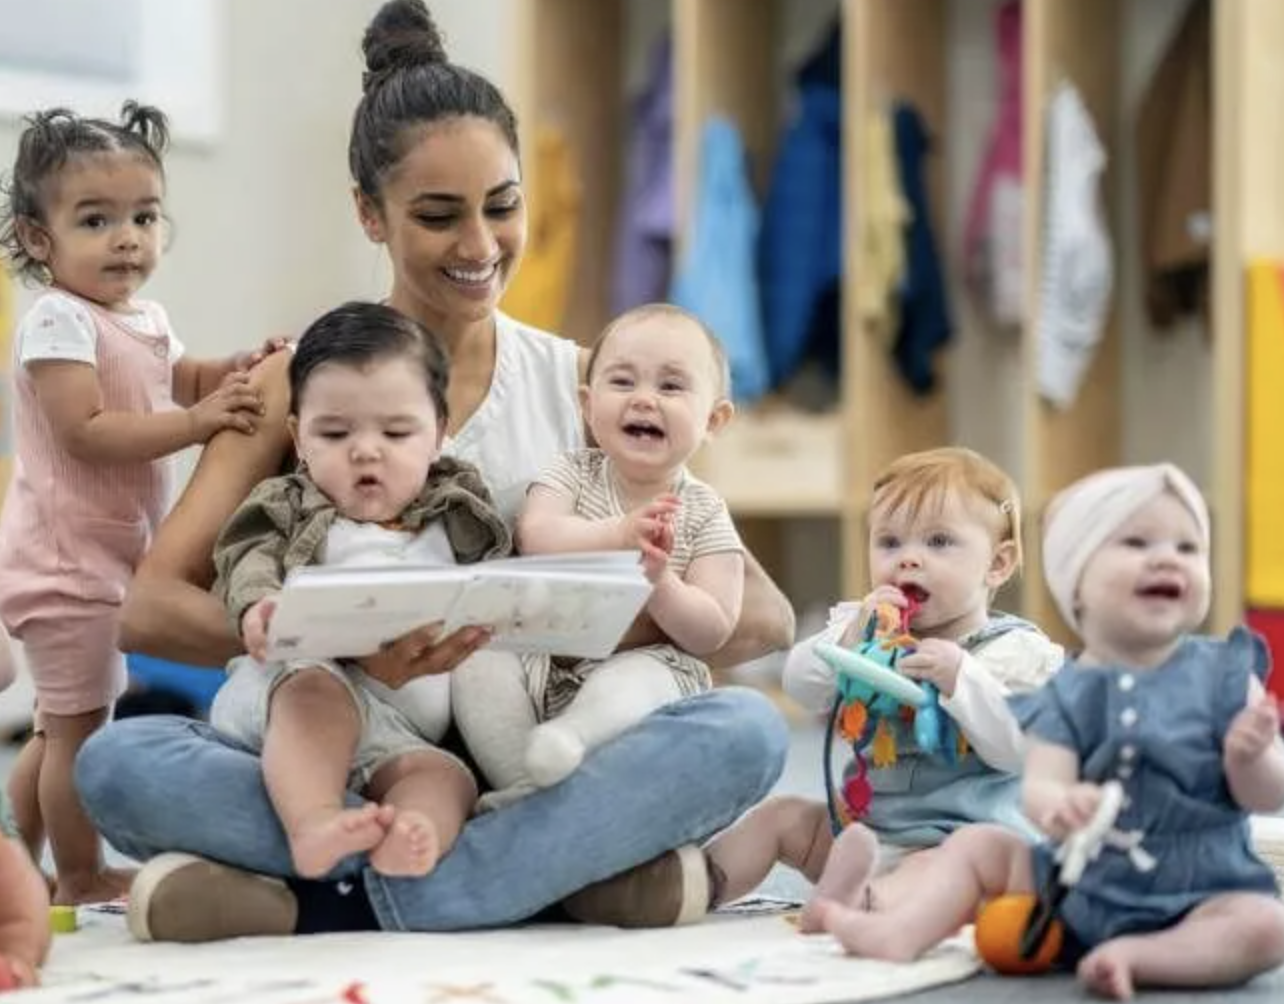 Childcare worker surrounded by babies while sitting on daycare facility floor.